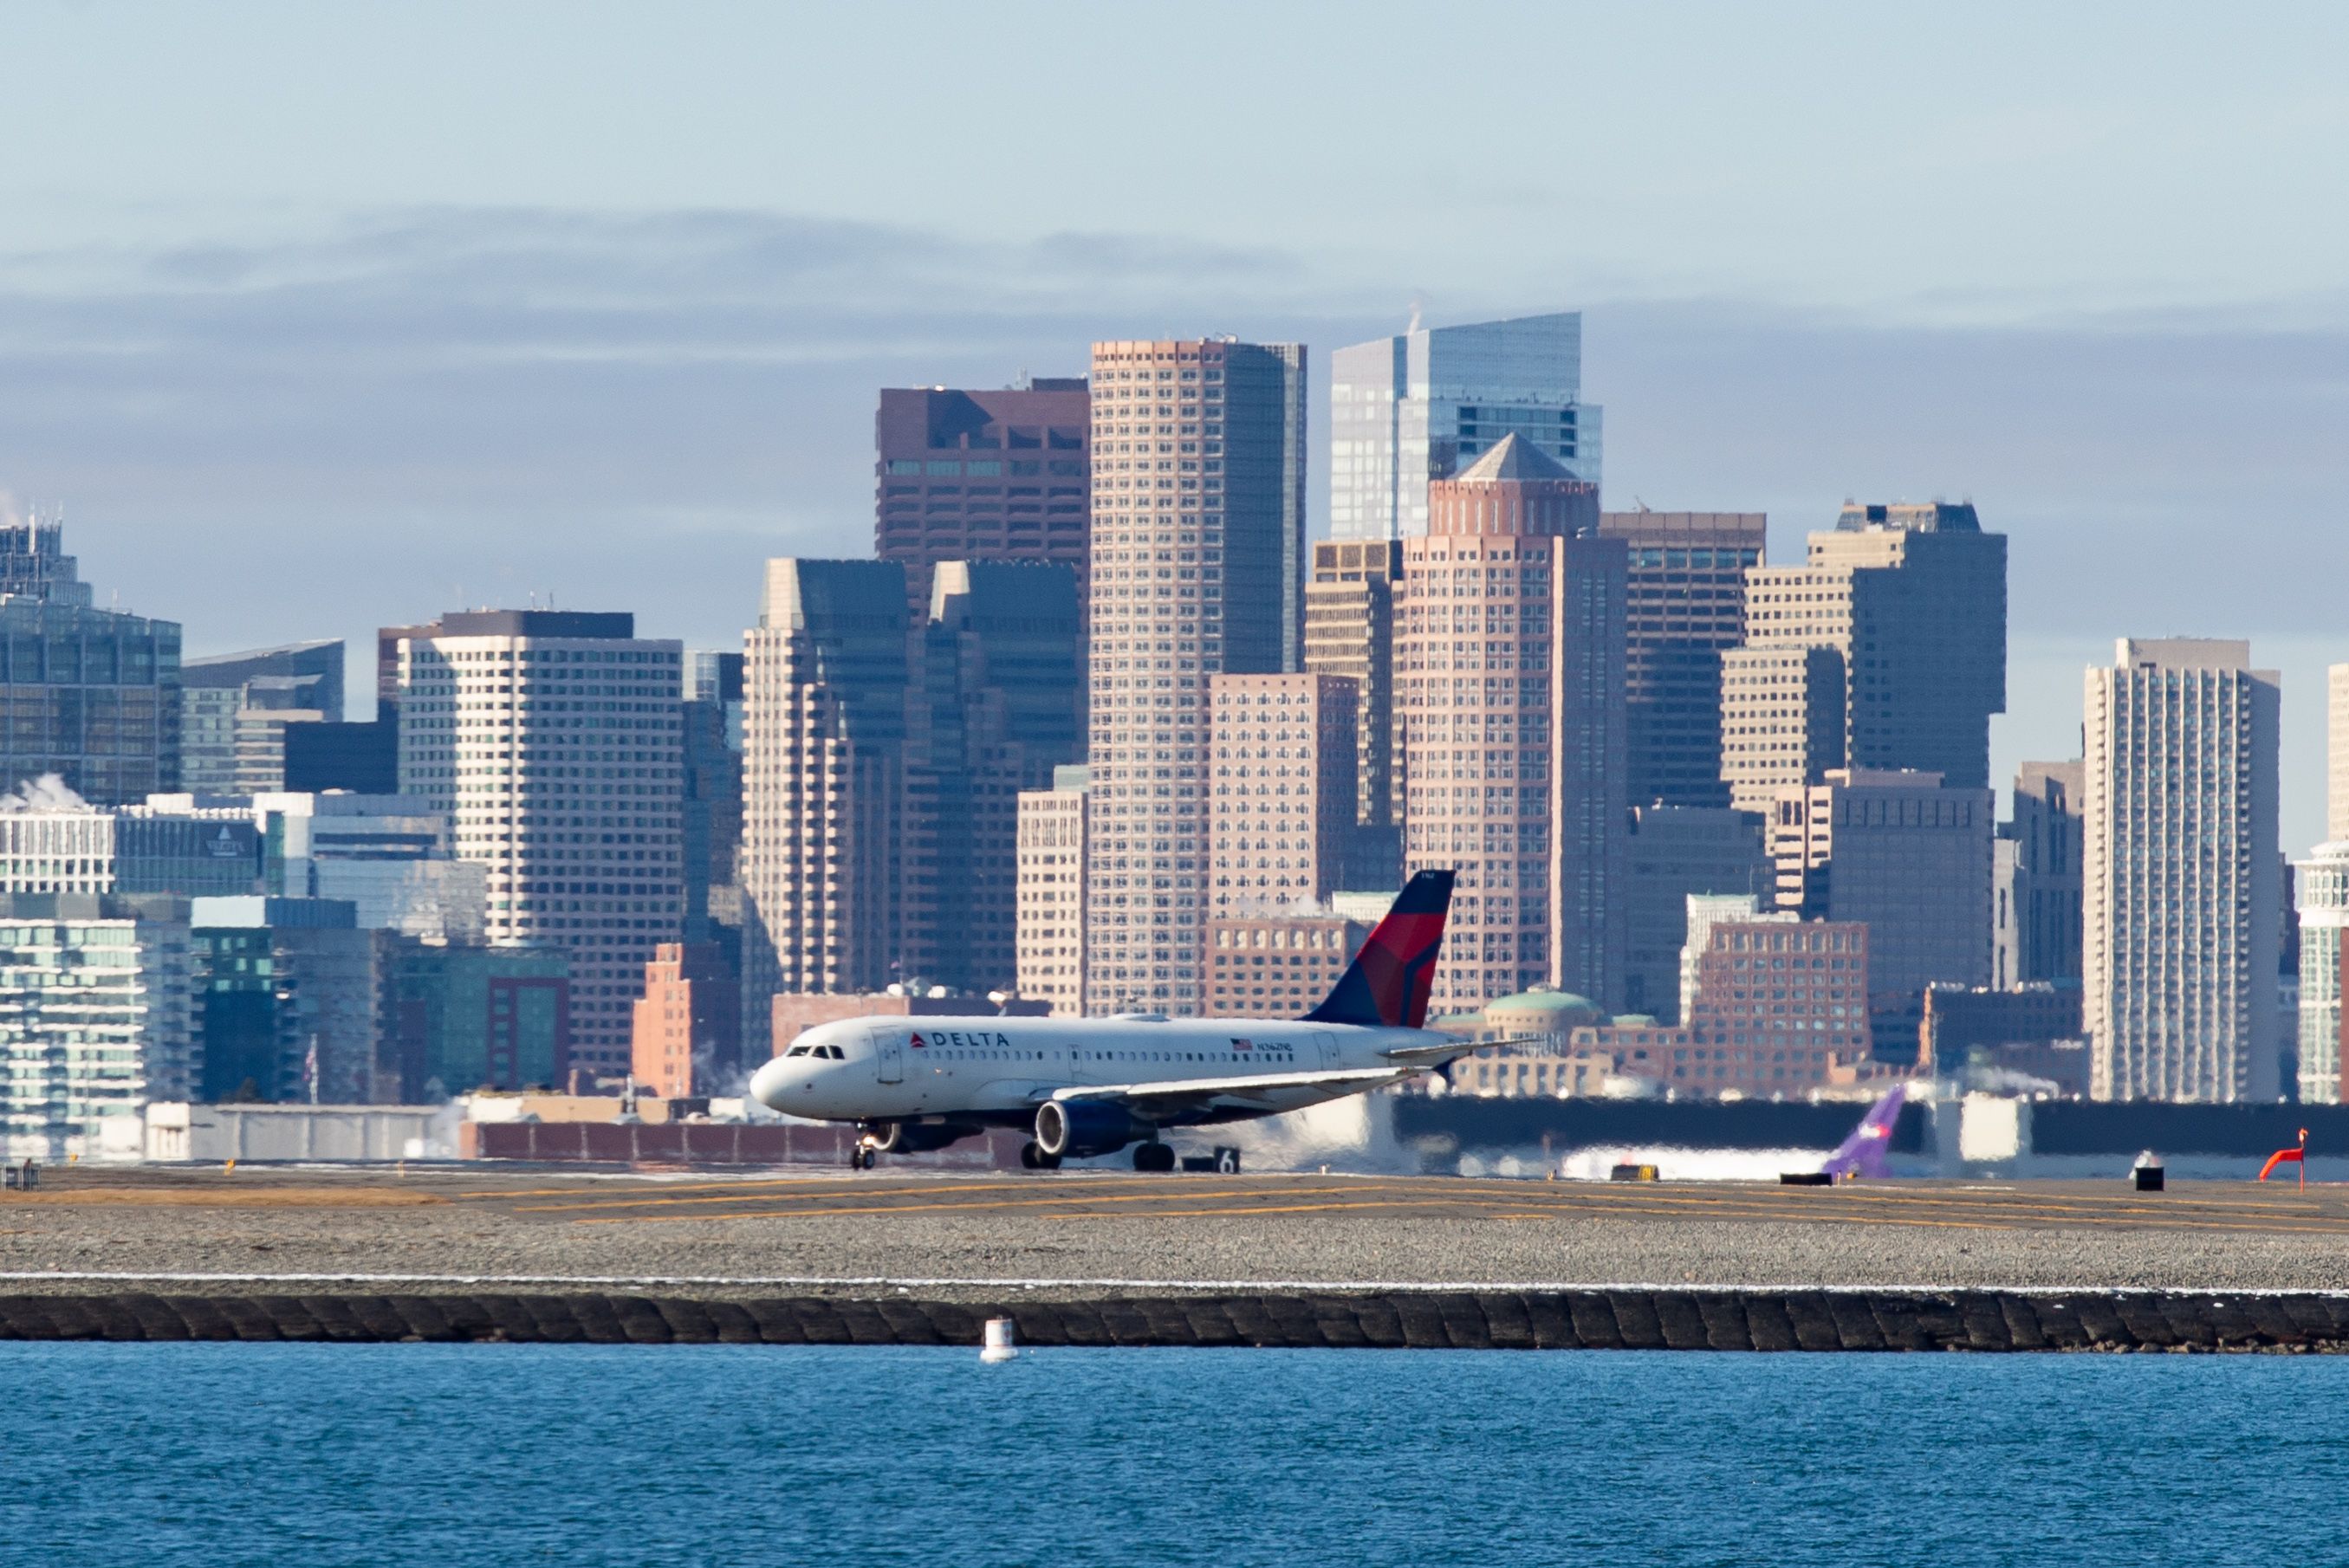 A Delta Air Lines aircraft on a taxiway at Boston Logan Airport with the Boston skyline in the background.